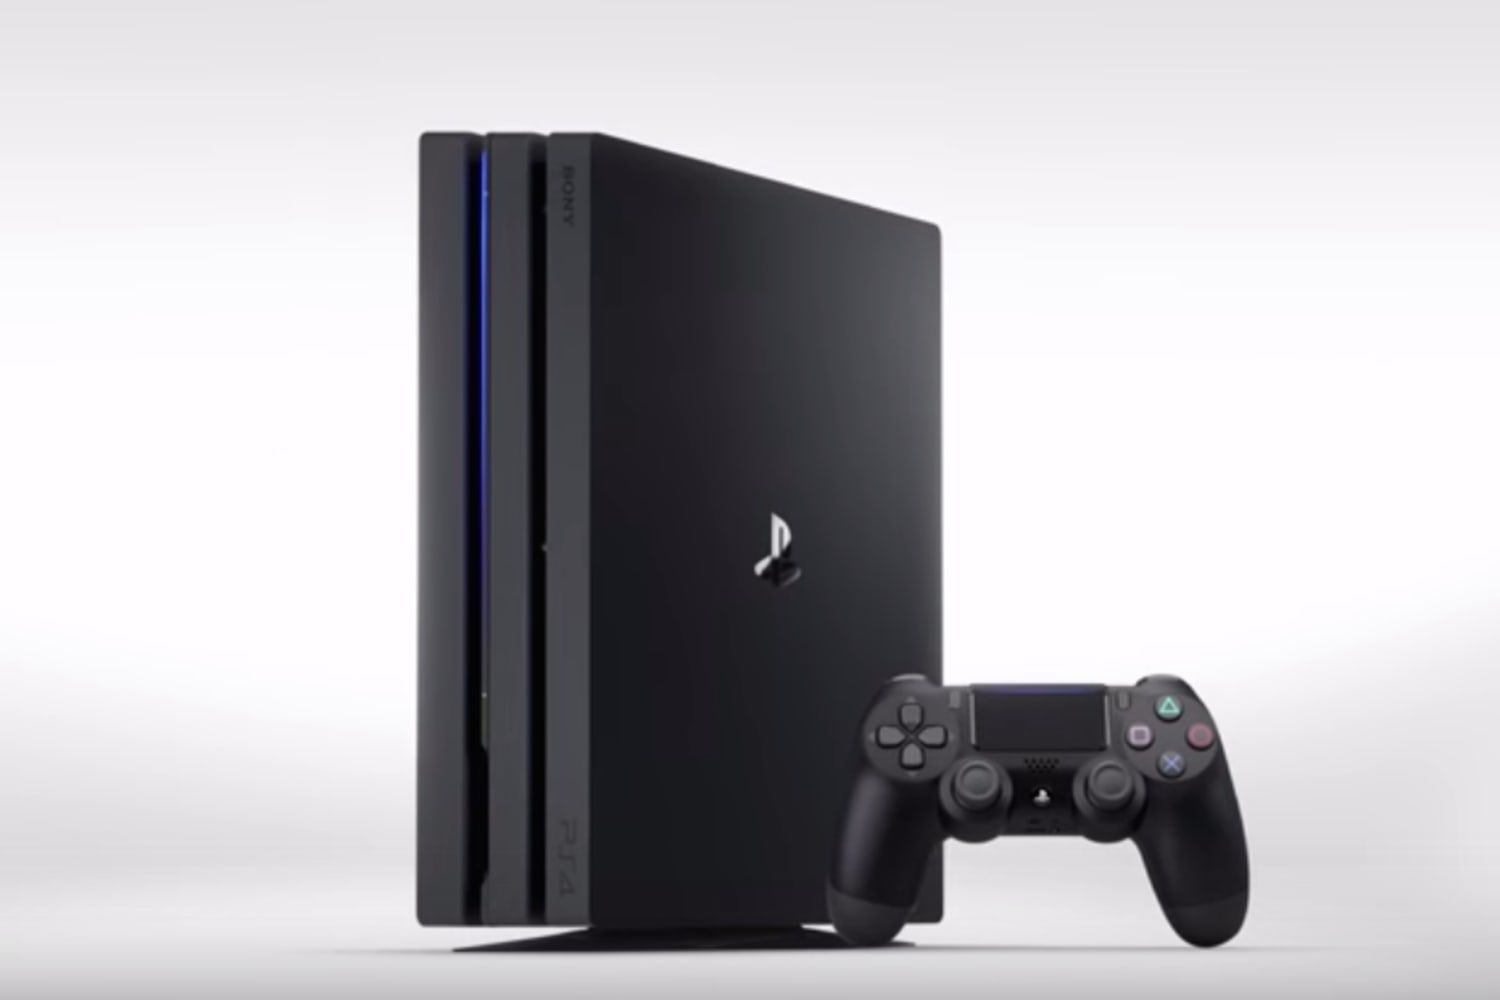 PS4 Pro release date UK and price revealed | Red Bull